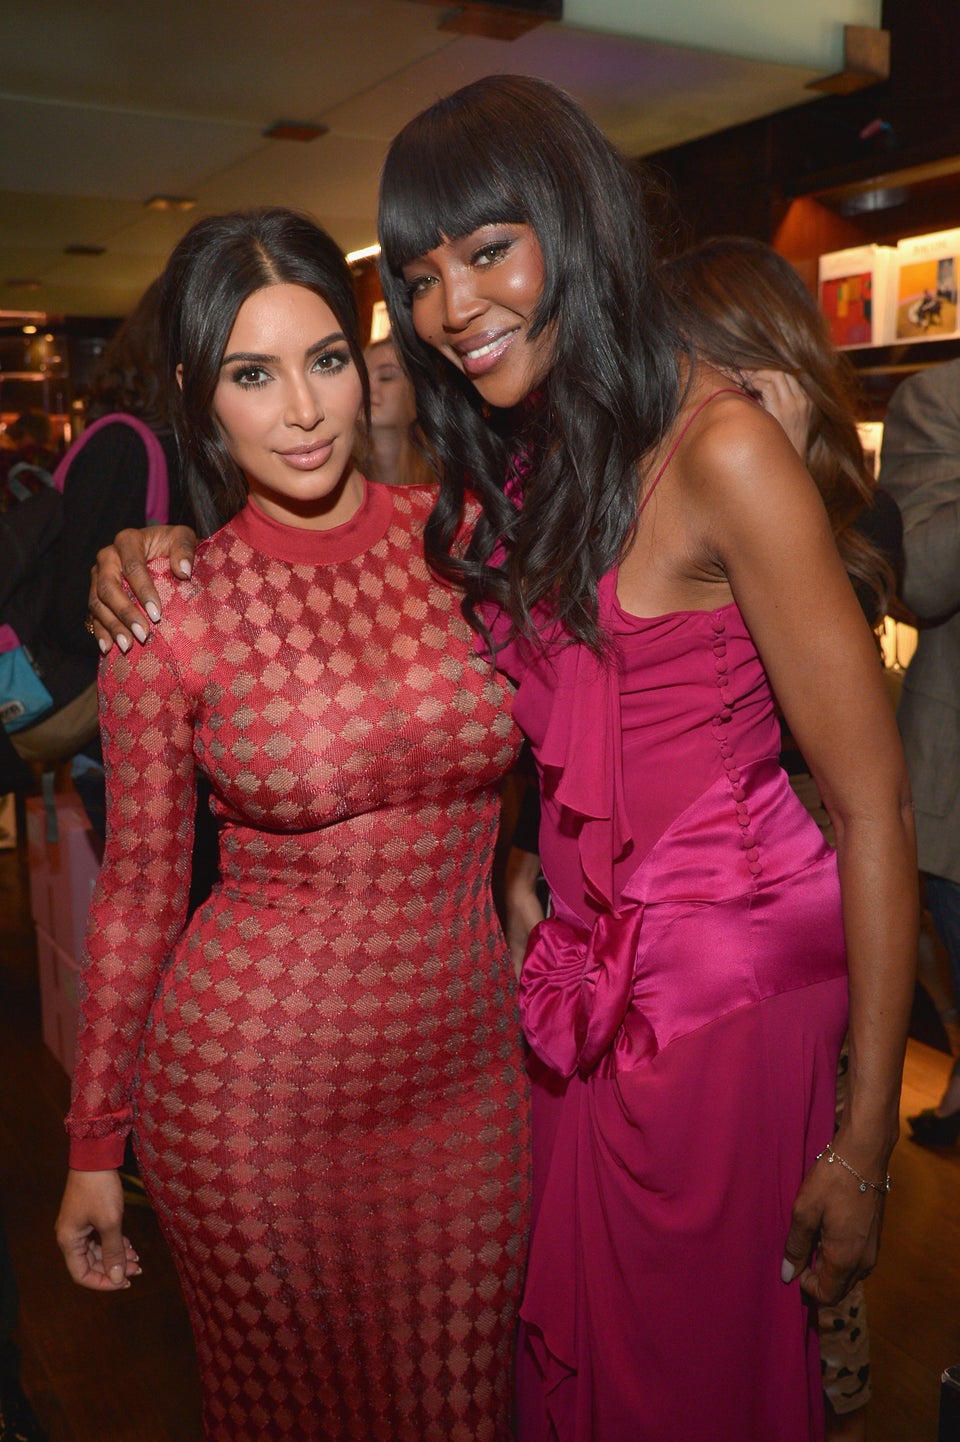 Kim Kardashian And Naomi Campbell Love Whipping Their Hair Back And Forth